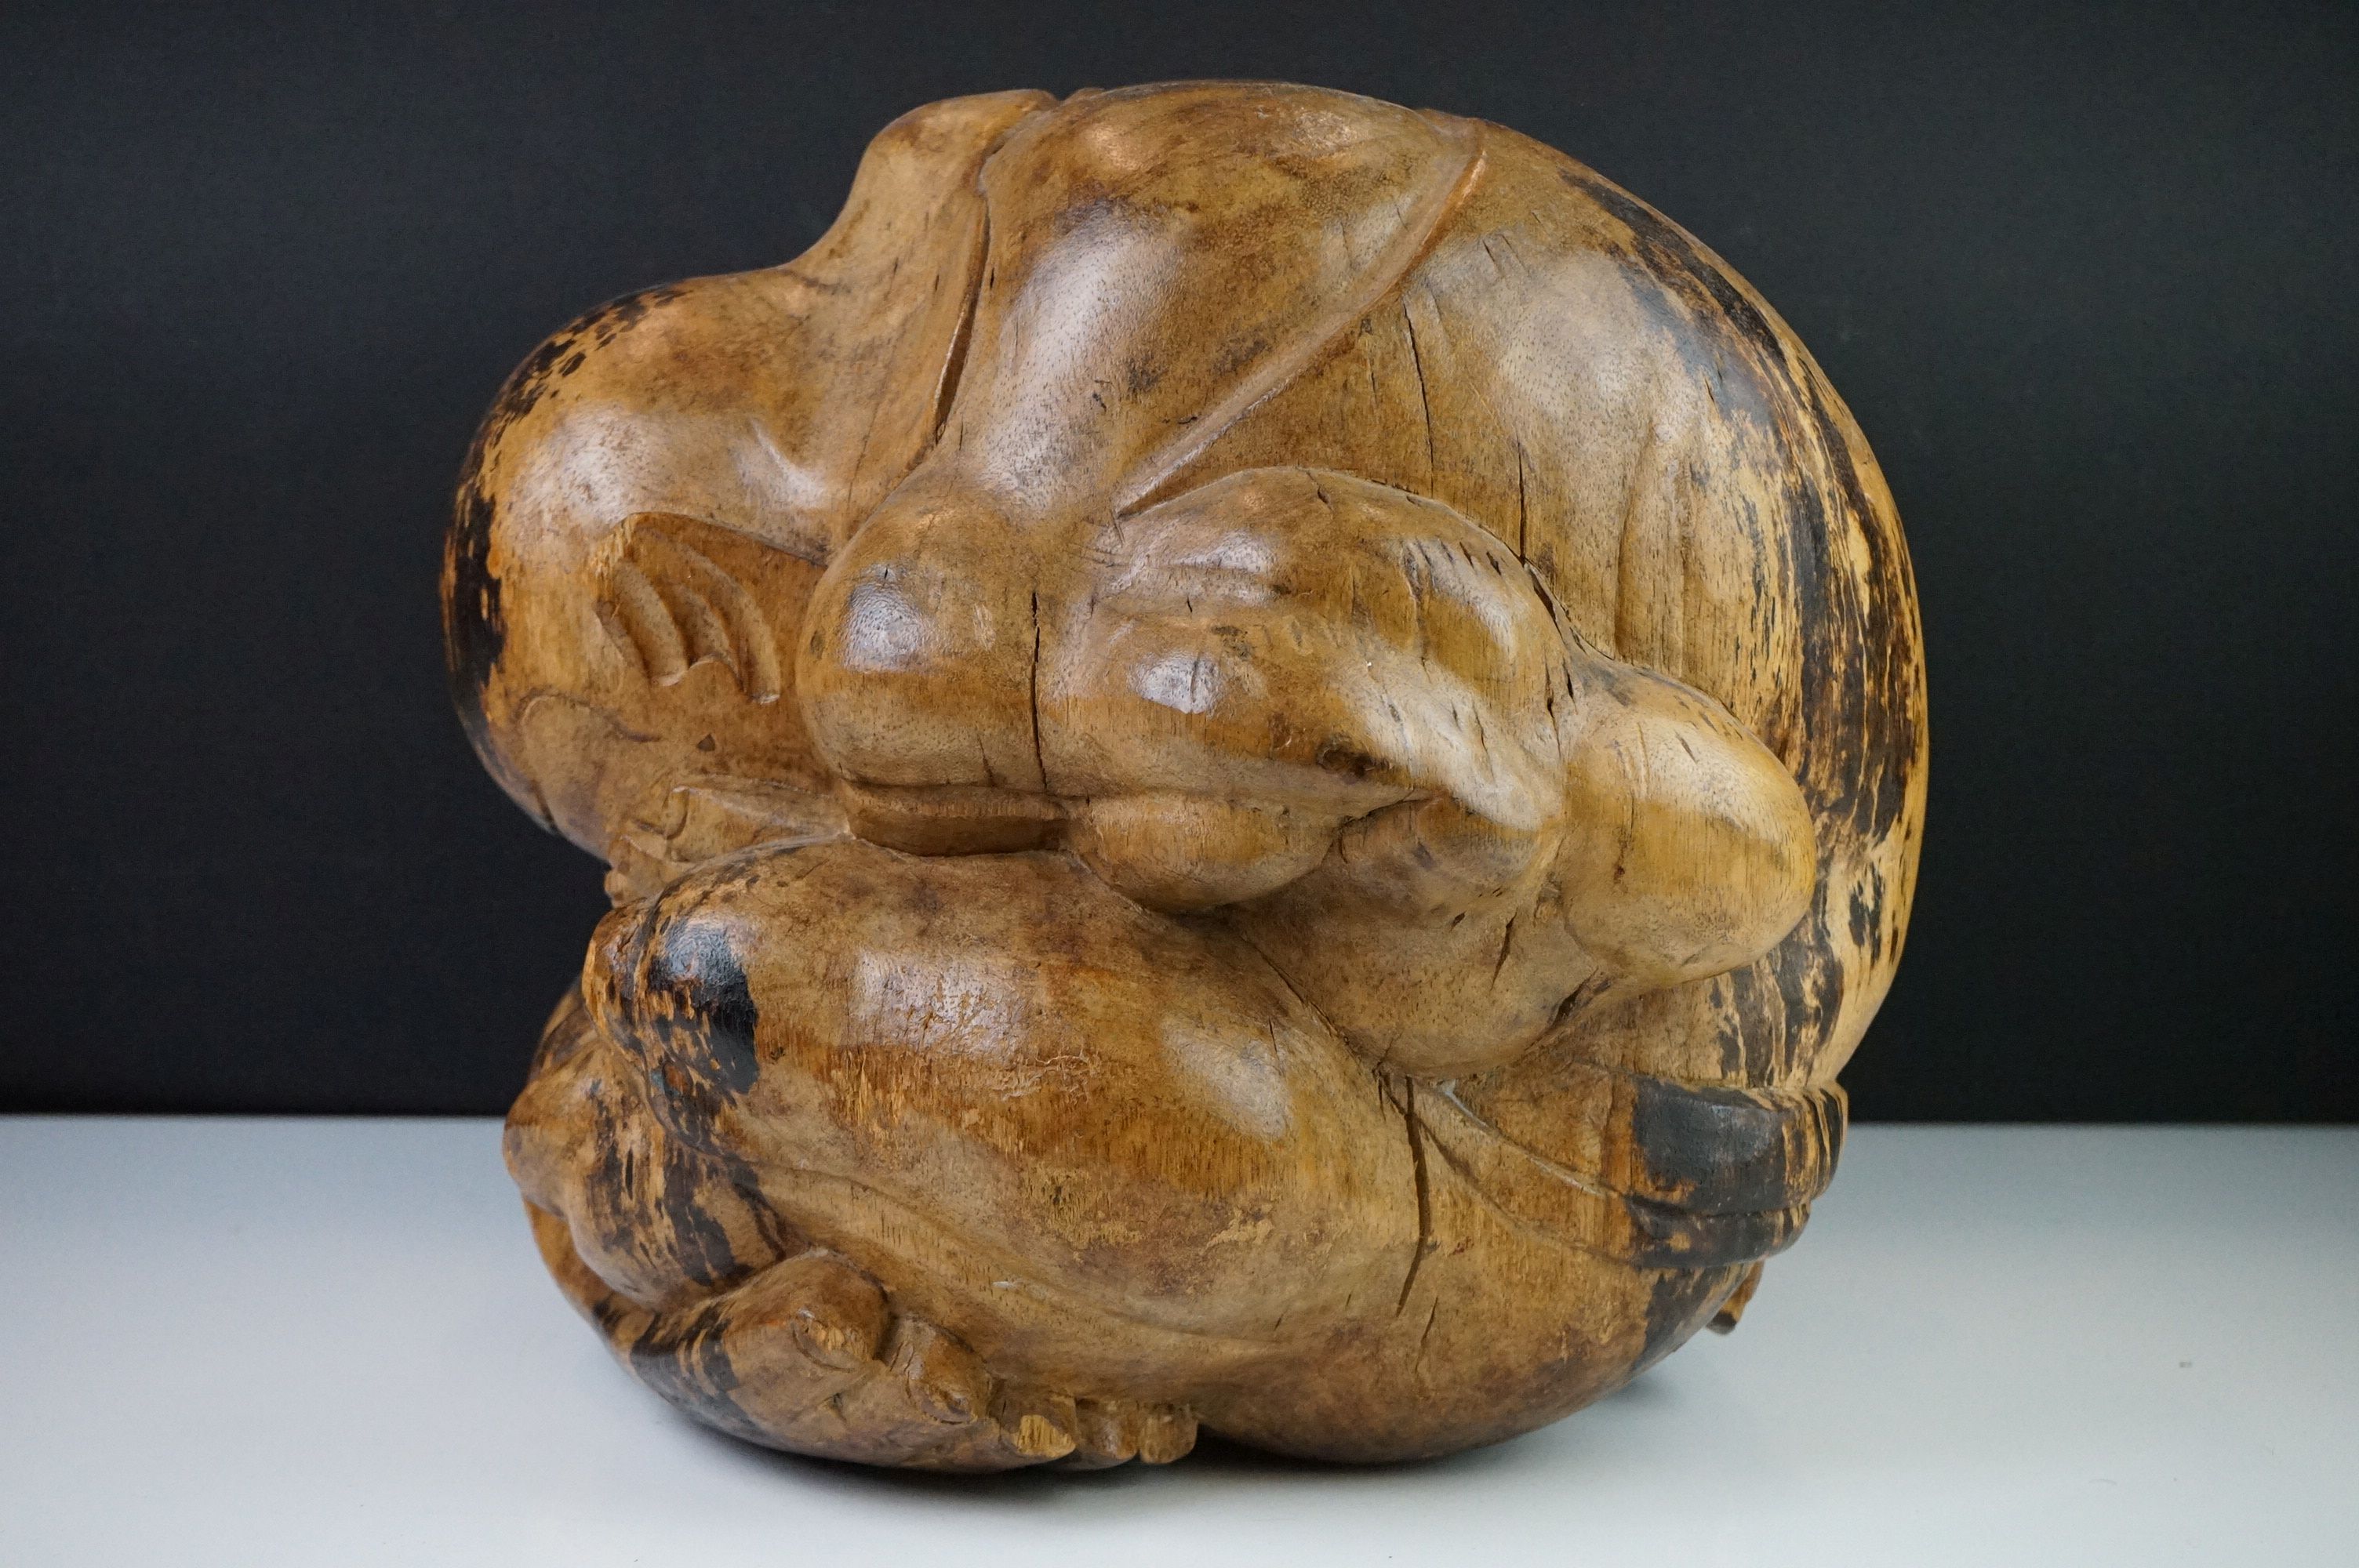 Carved Wooden Sculpture of a Seated Man with his head in his lap, 30cm high x 31cm wide - Image 2 of 8